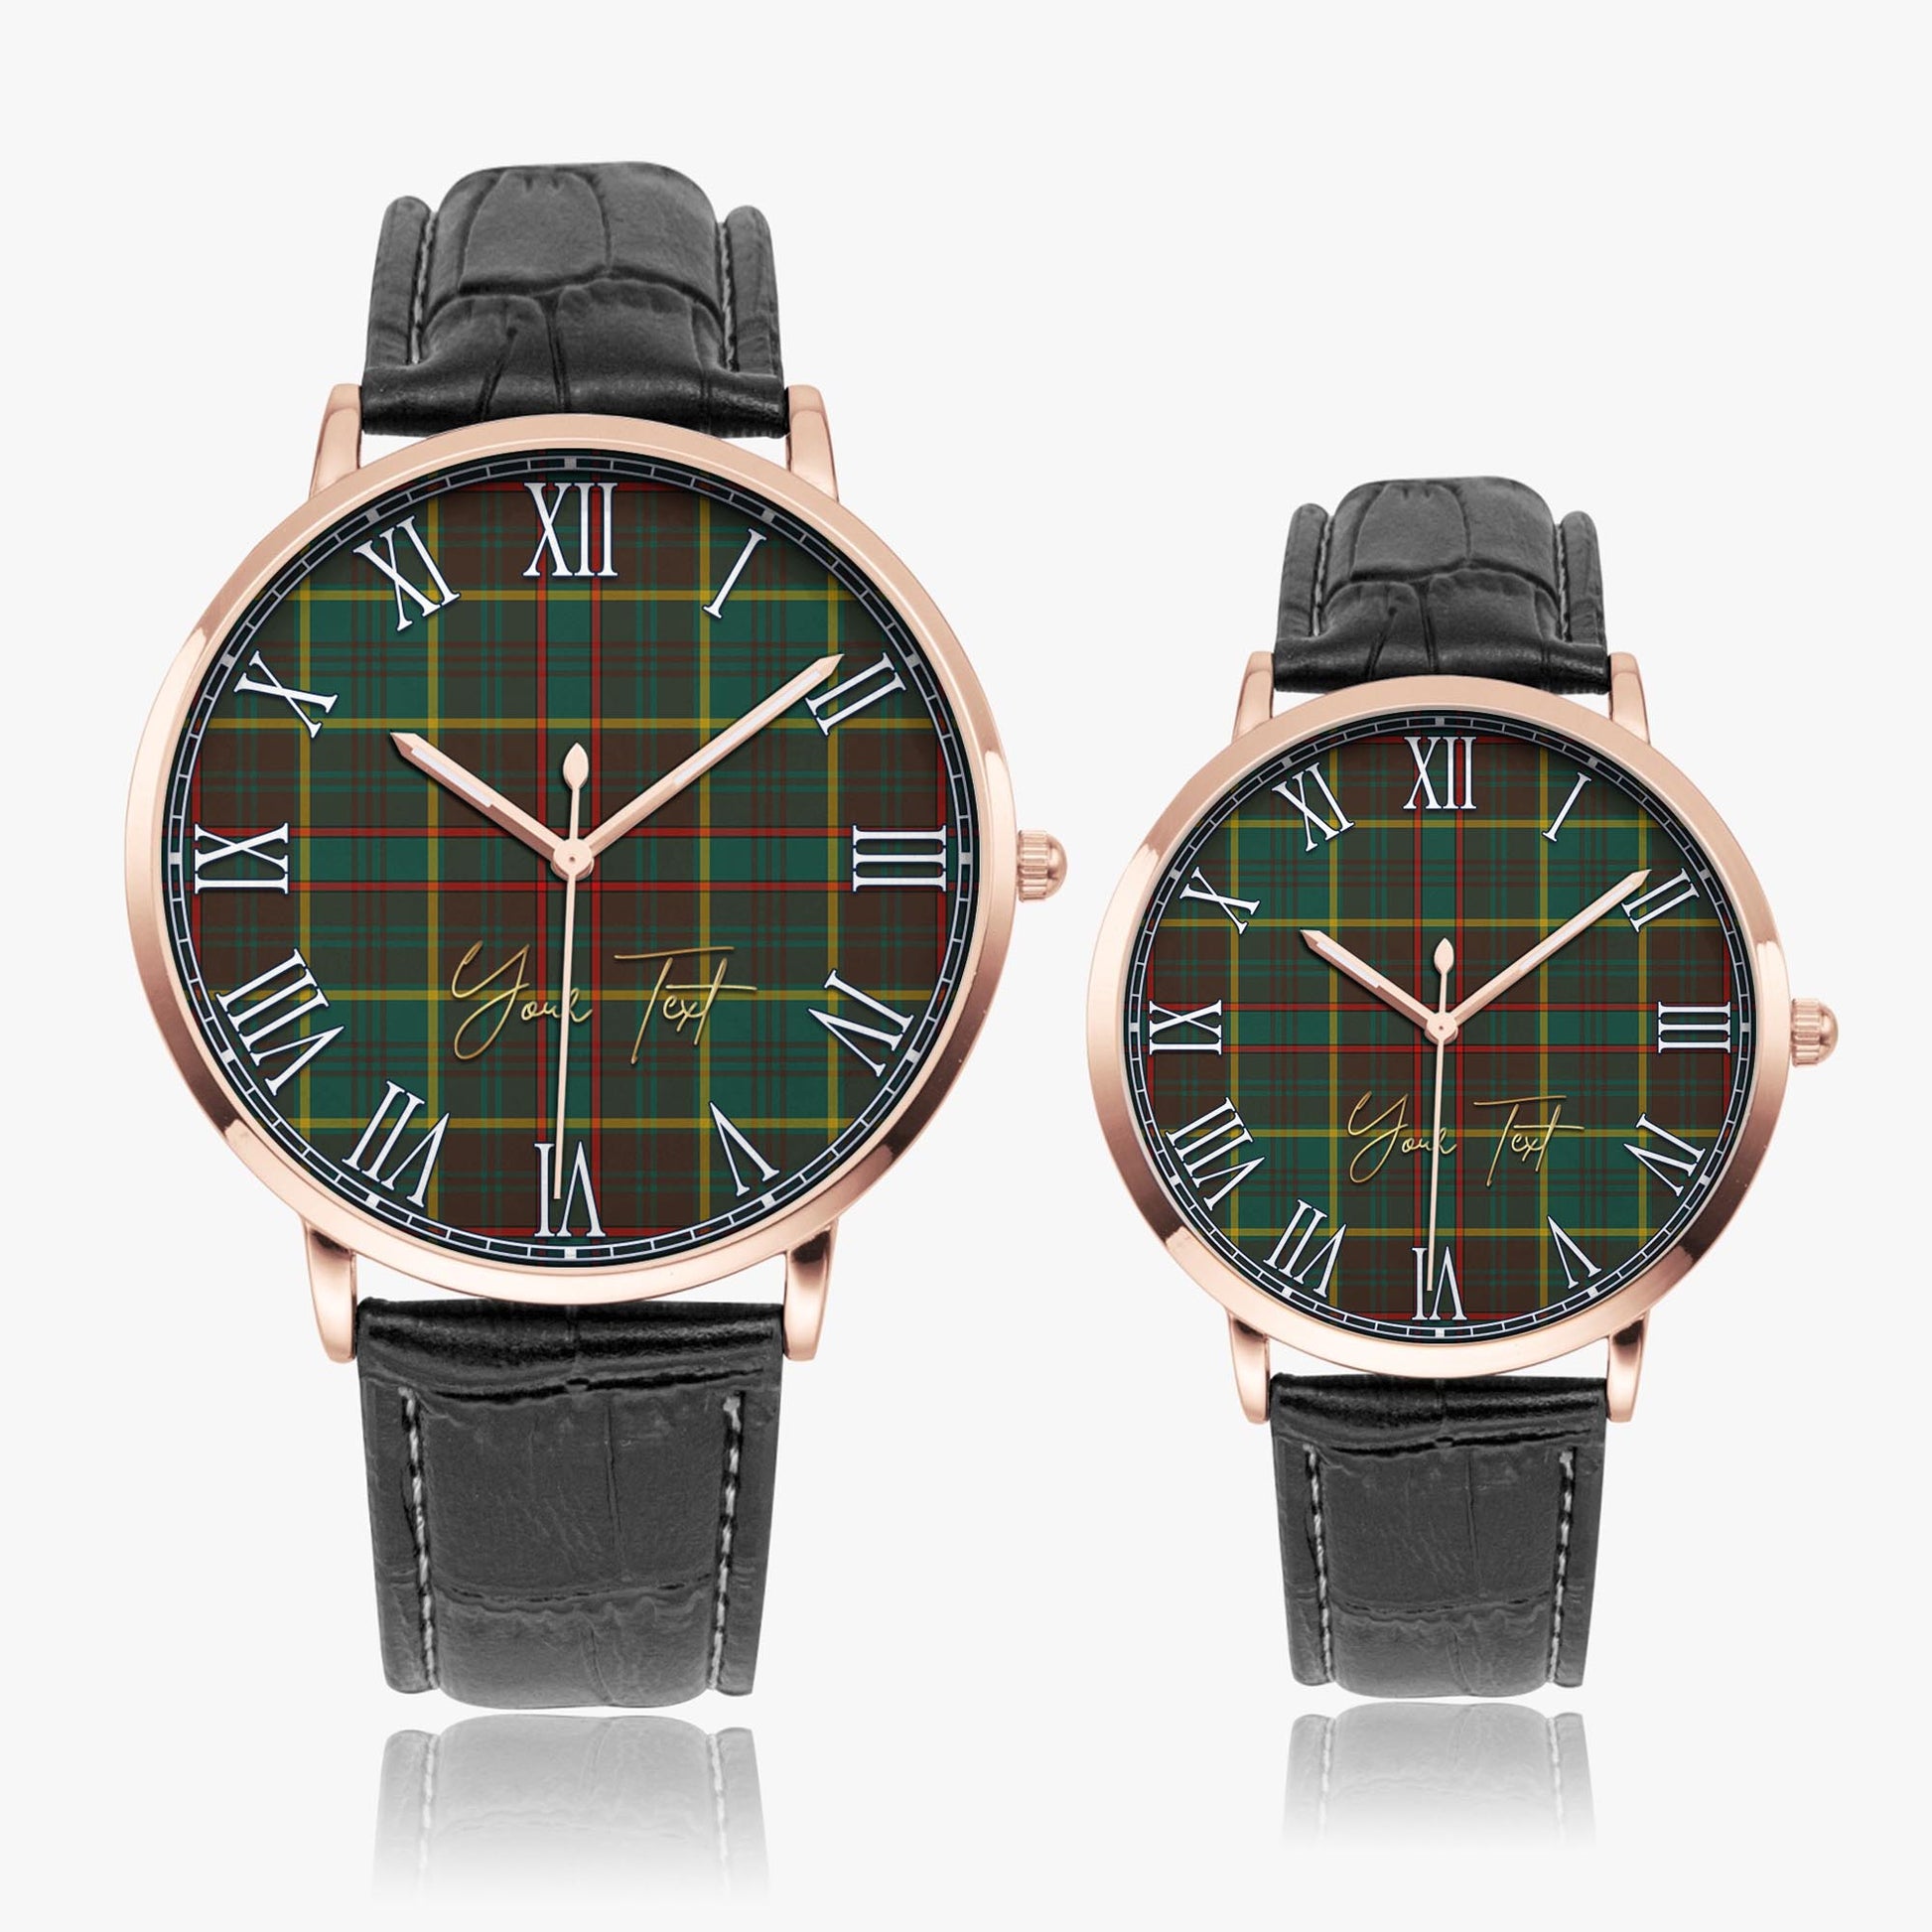 Ontario Province Canada Tartan Personalized Your Text Leather Trap Quartz Watch Ultra Thin Rose Gold Case With Black Leather Strap - Tartanvibesclothing